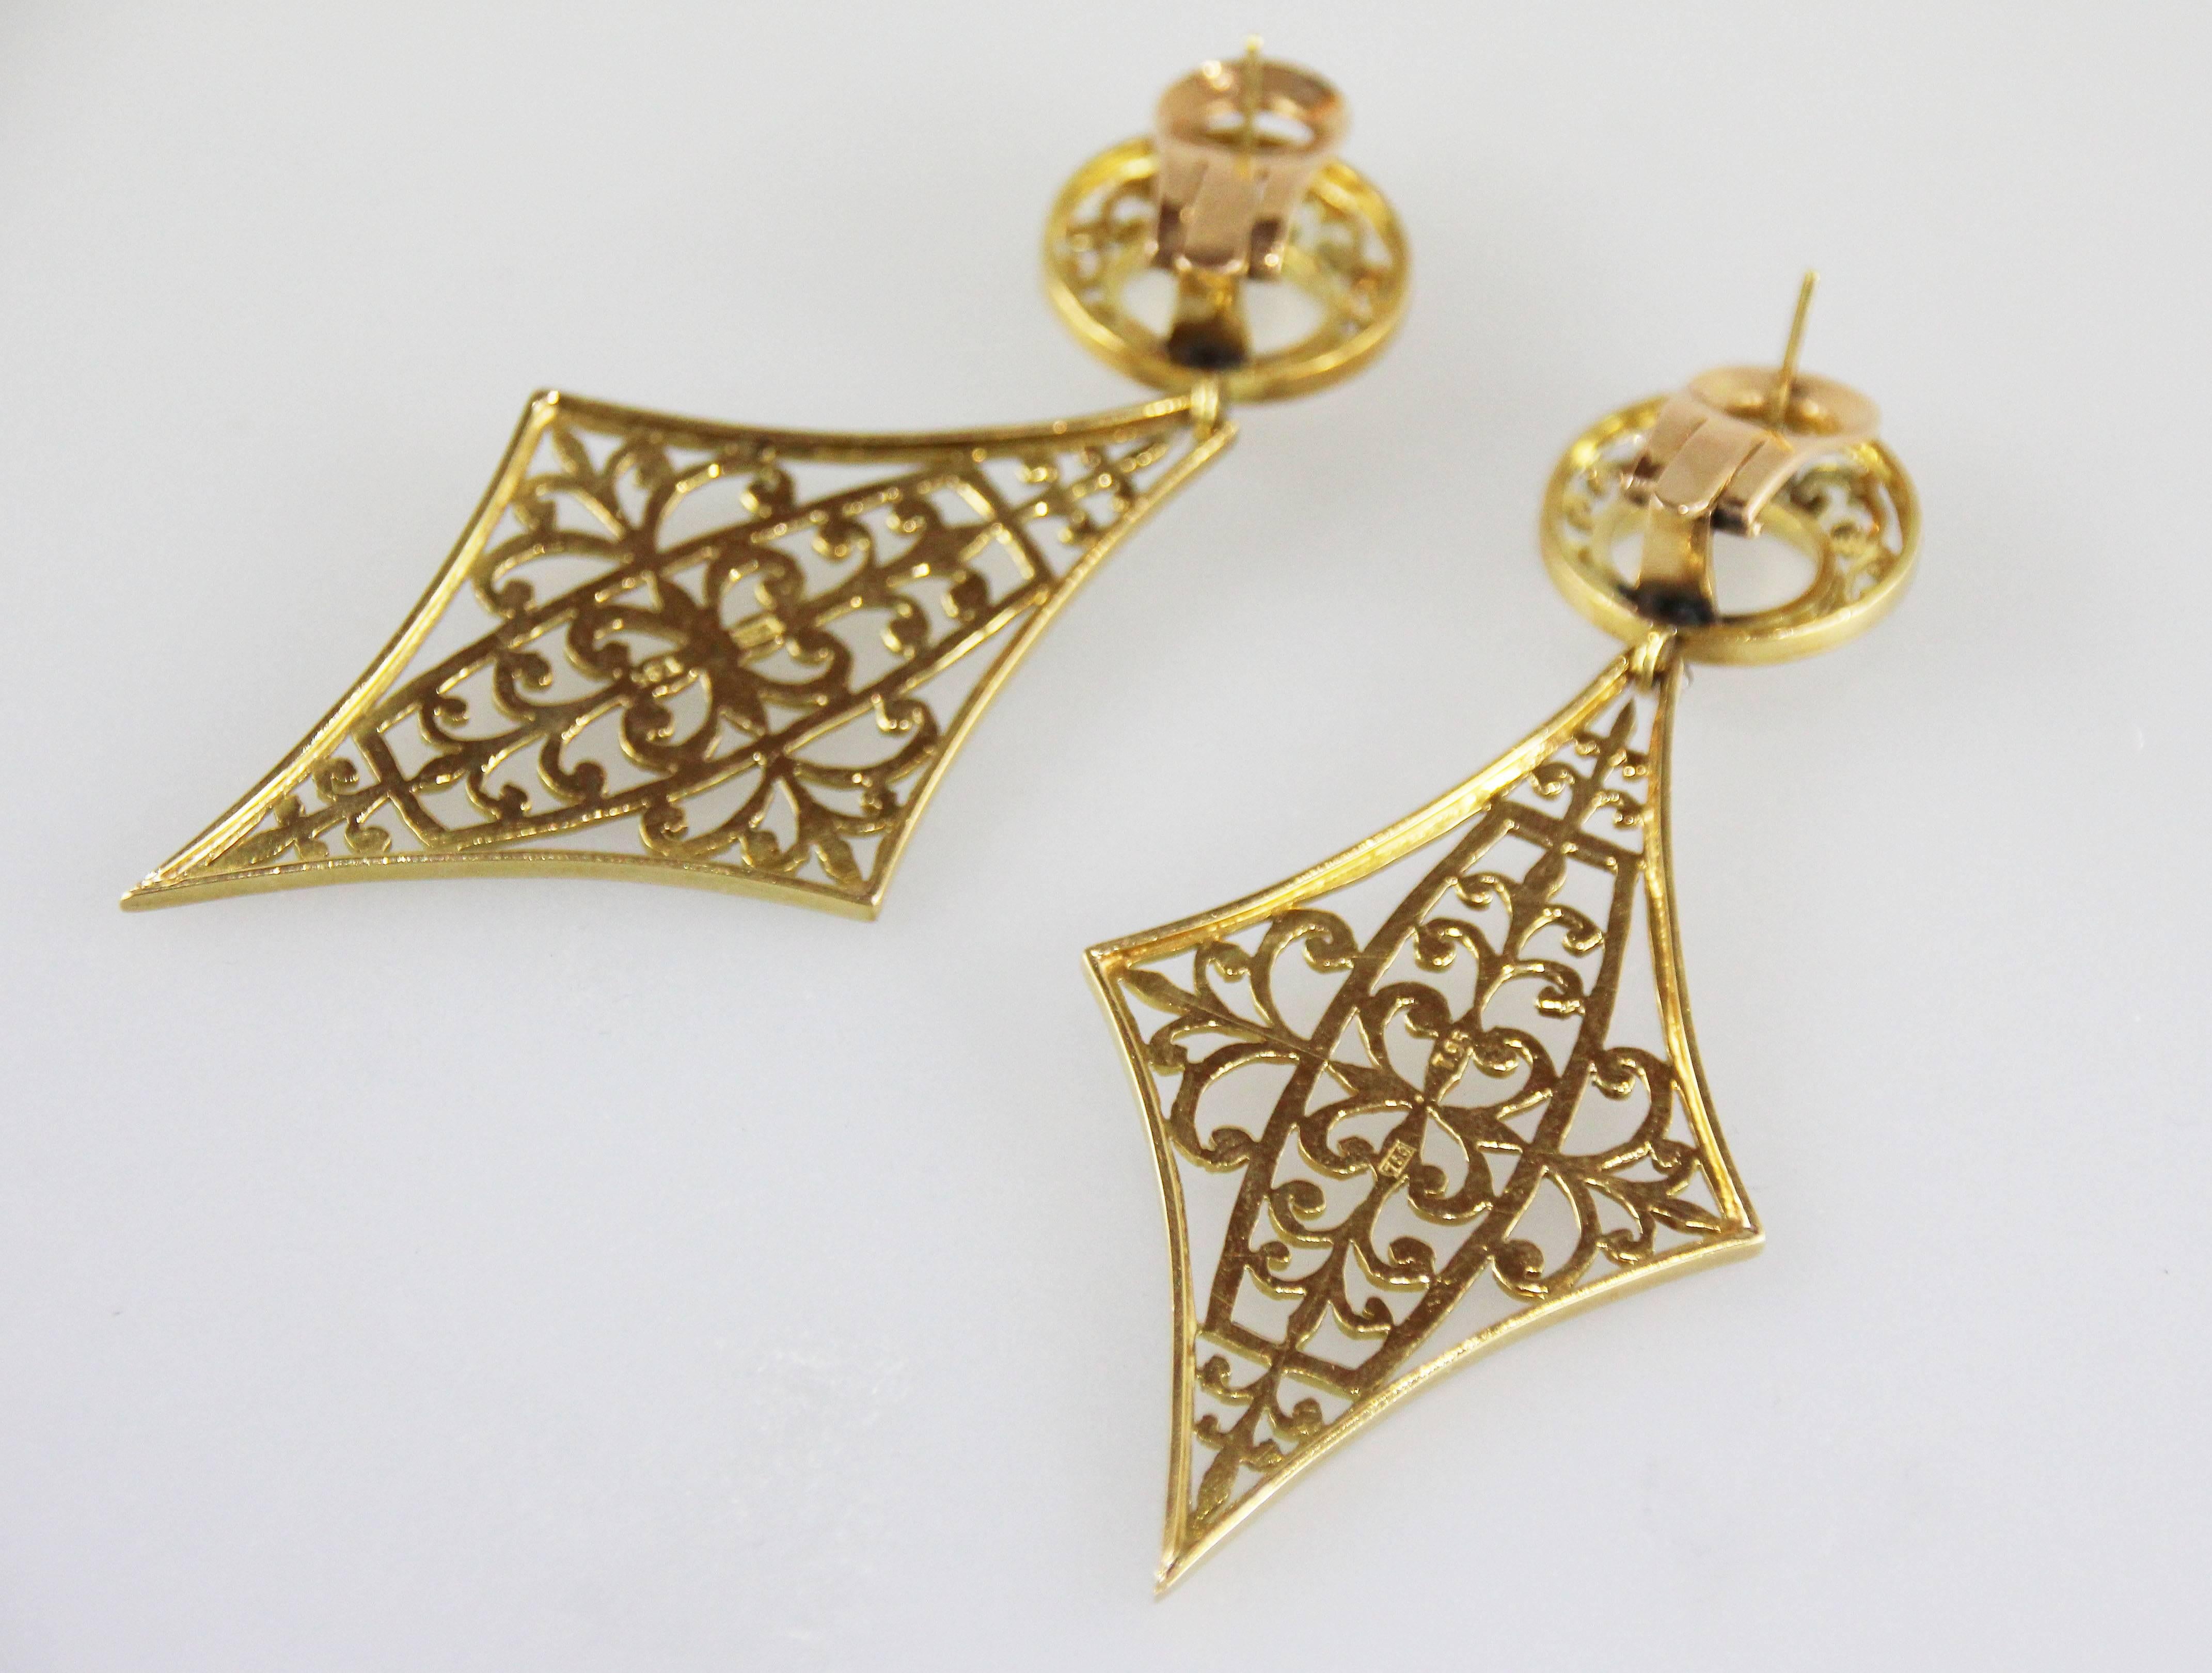 Large earrings with etched details, and a colorless stone connecting the tops and bottoms. 